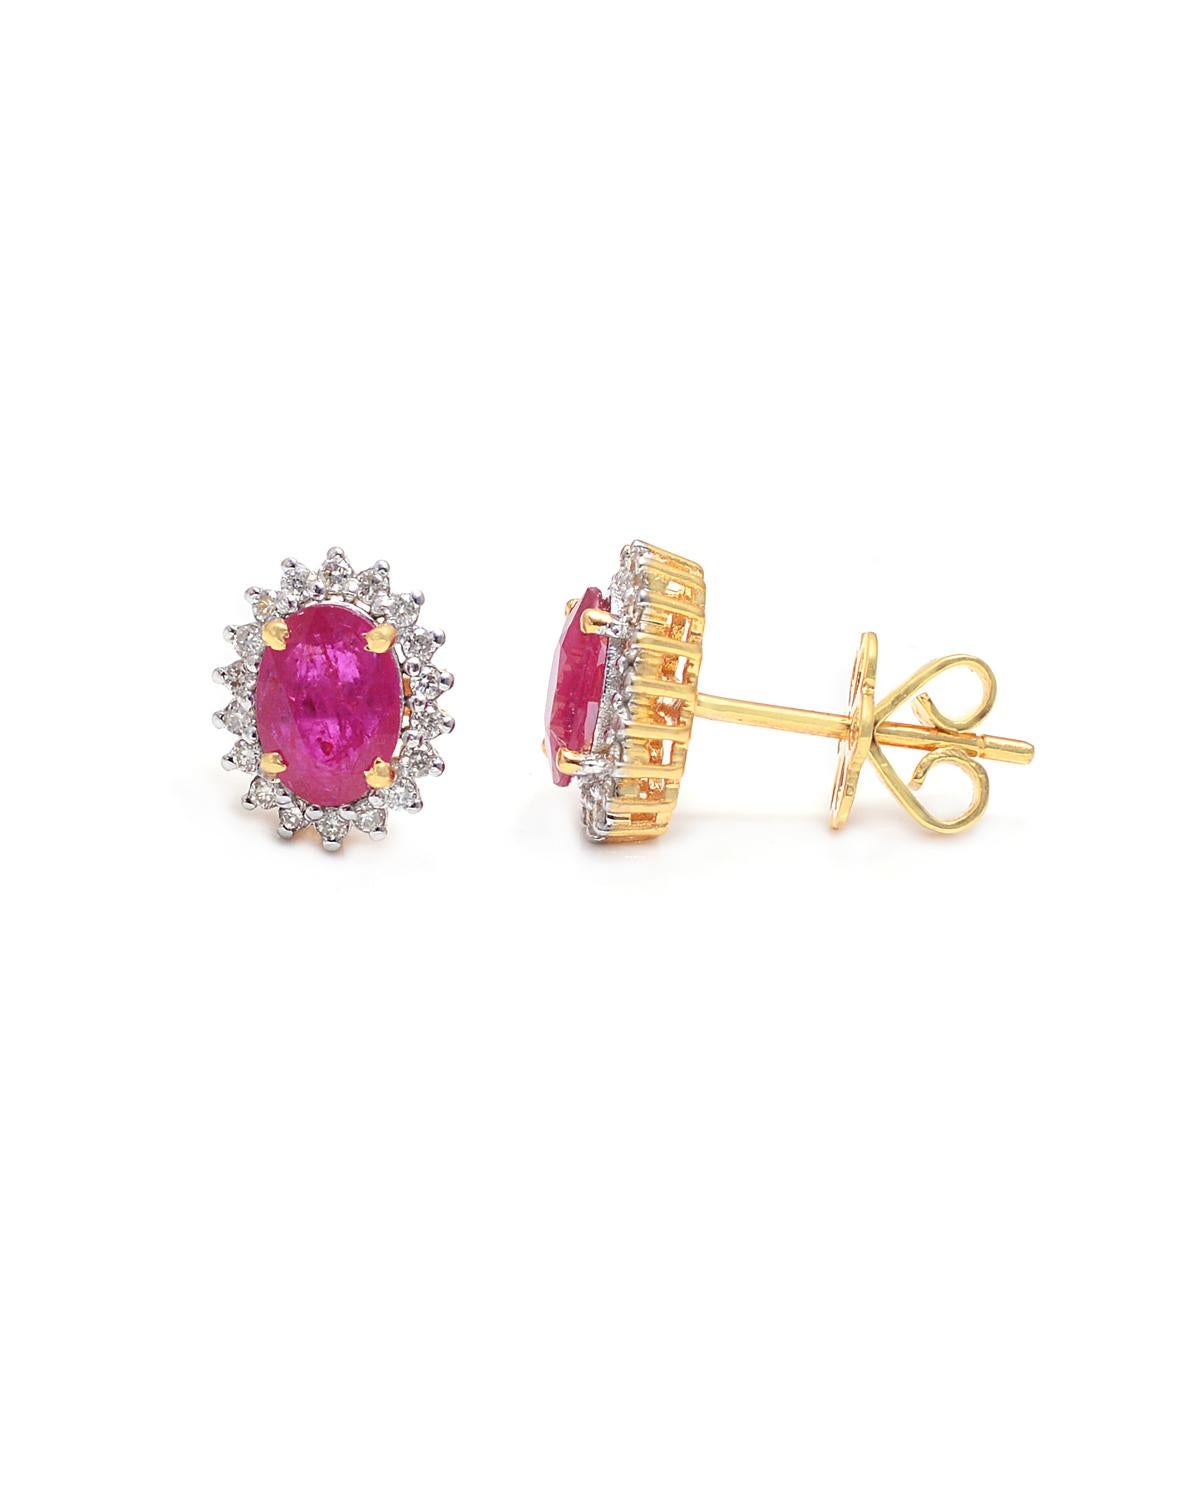 Brilliant Cut Ruby Stud Earrings with Diamond in 14k Gold For Sale